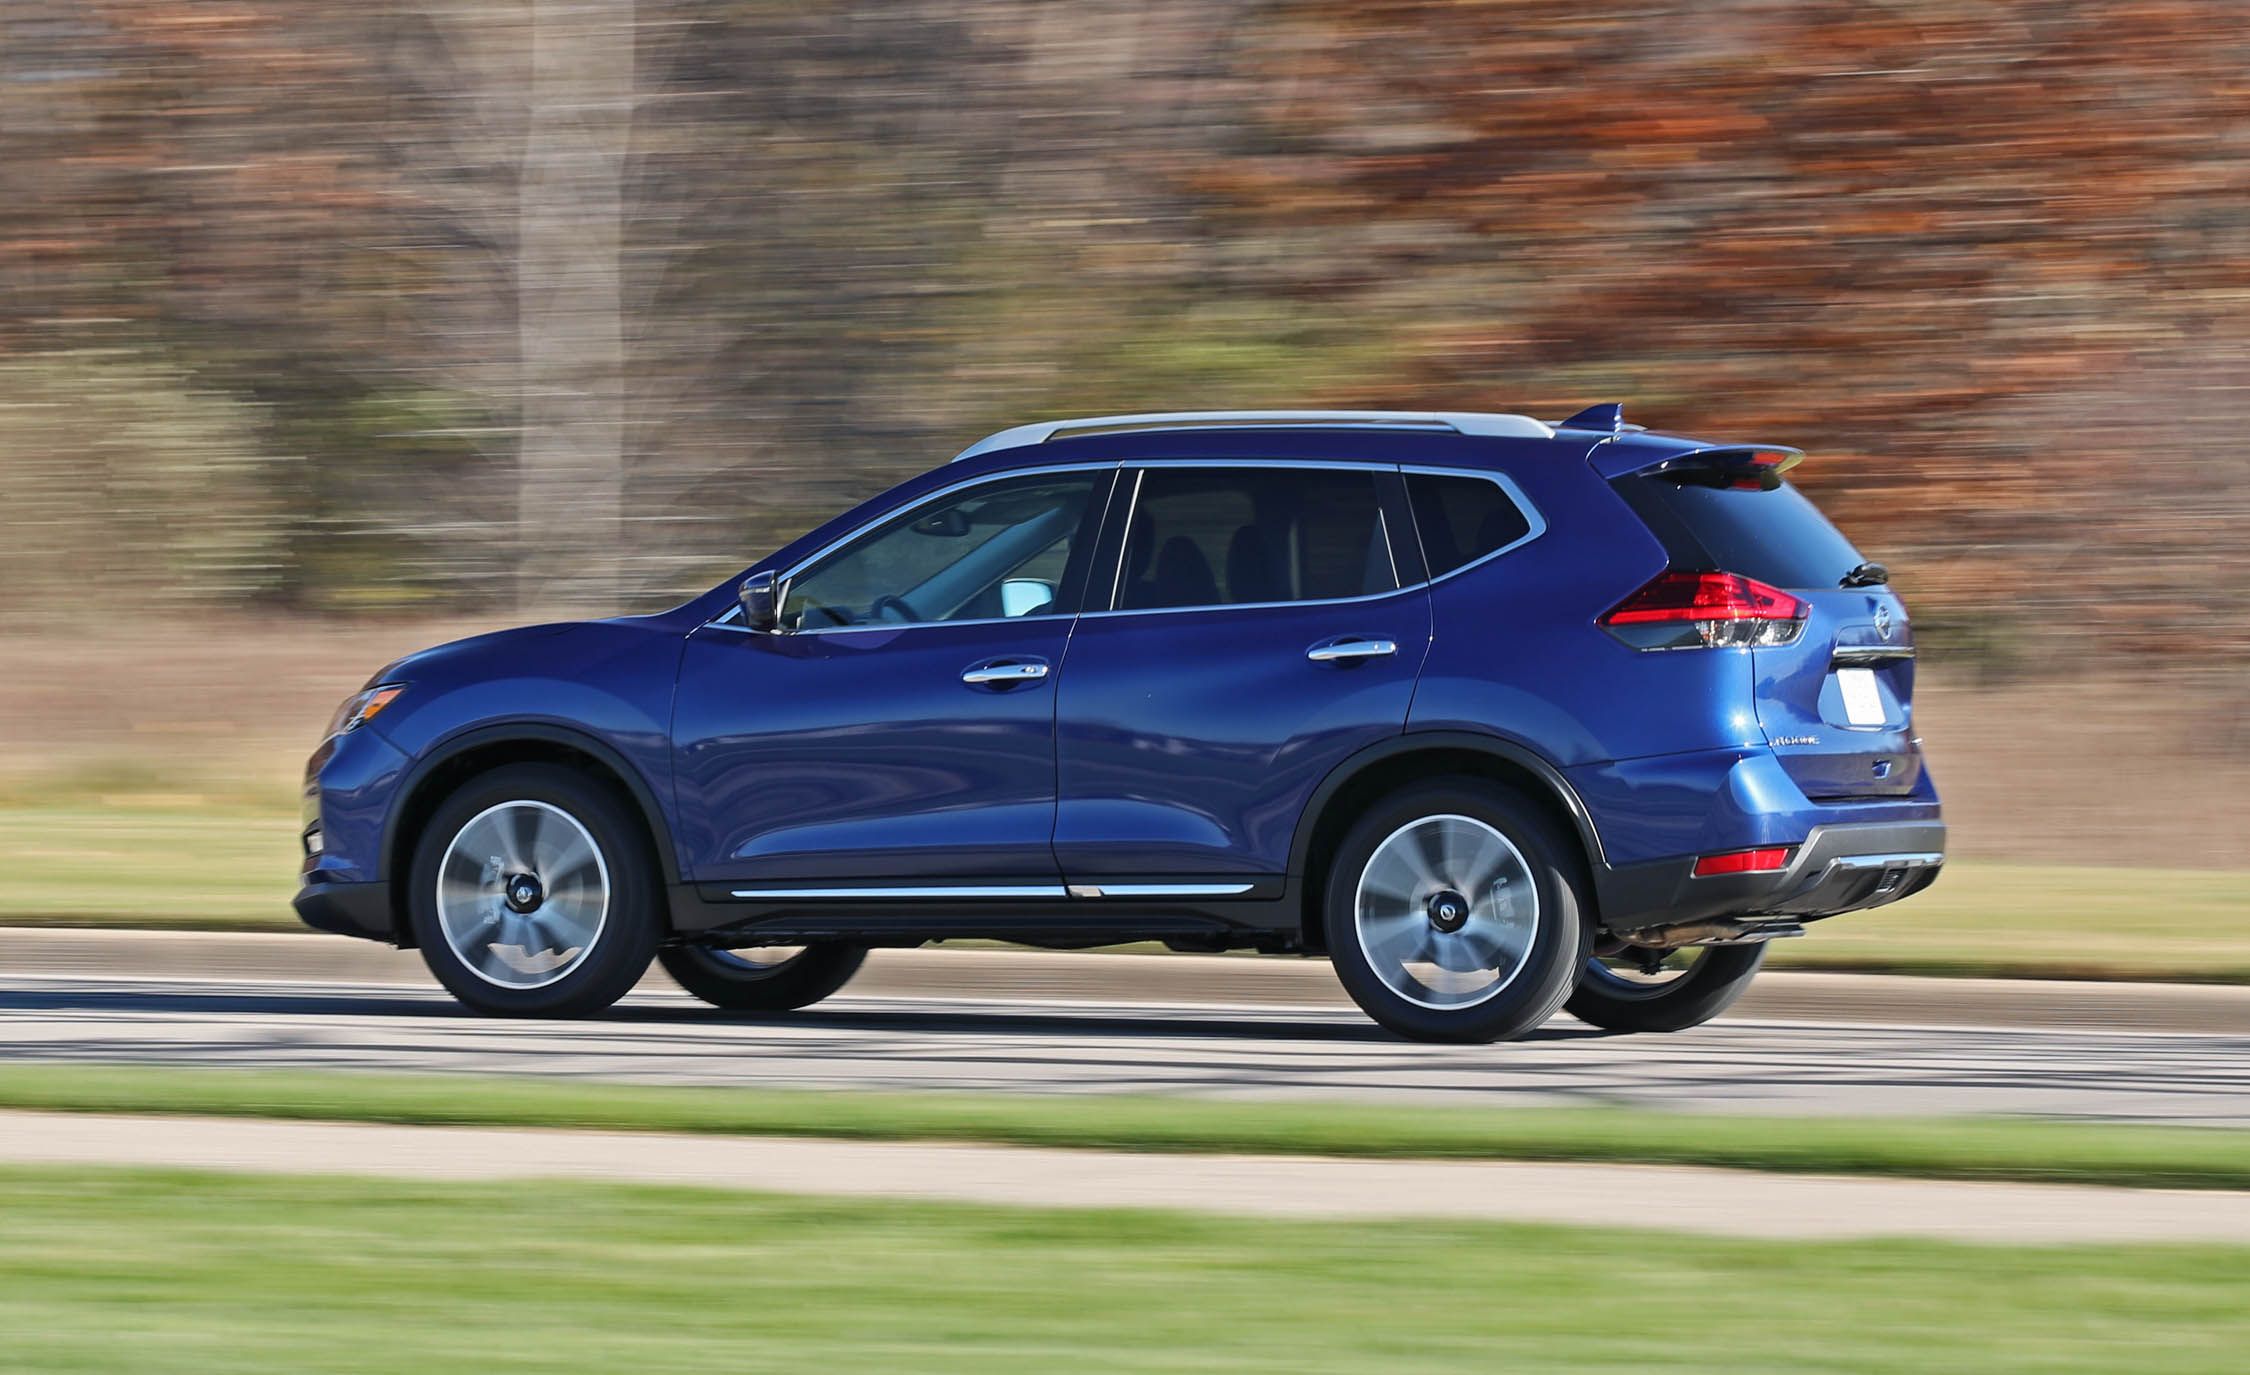 2017 Nissan Rogue Test Drive Side And Rear View (View 7 of 37)